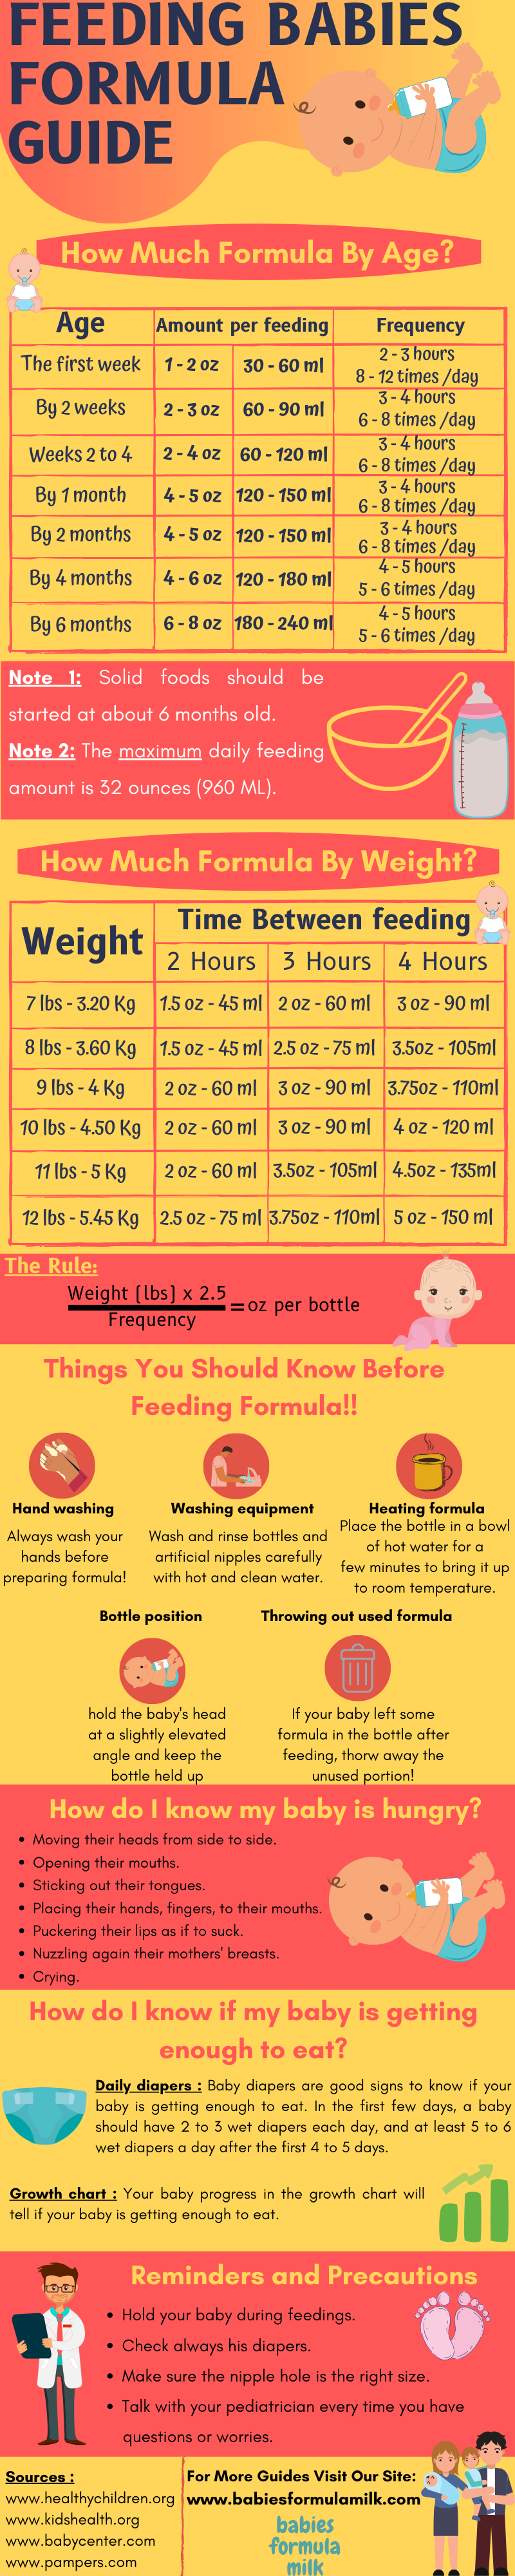 how much formula should a baby eat chart guide